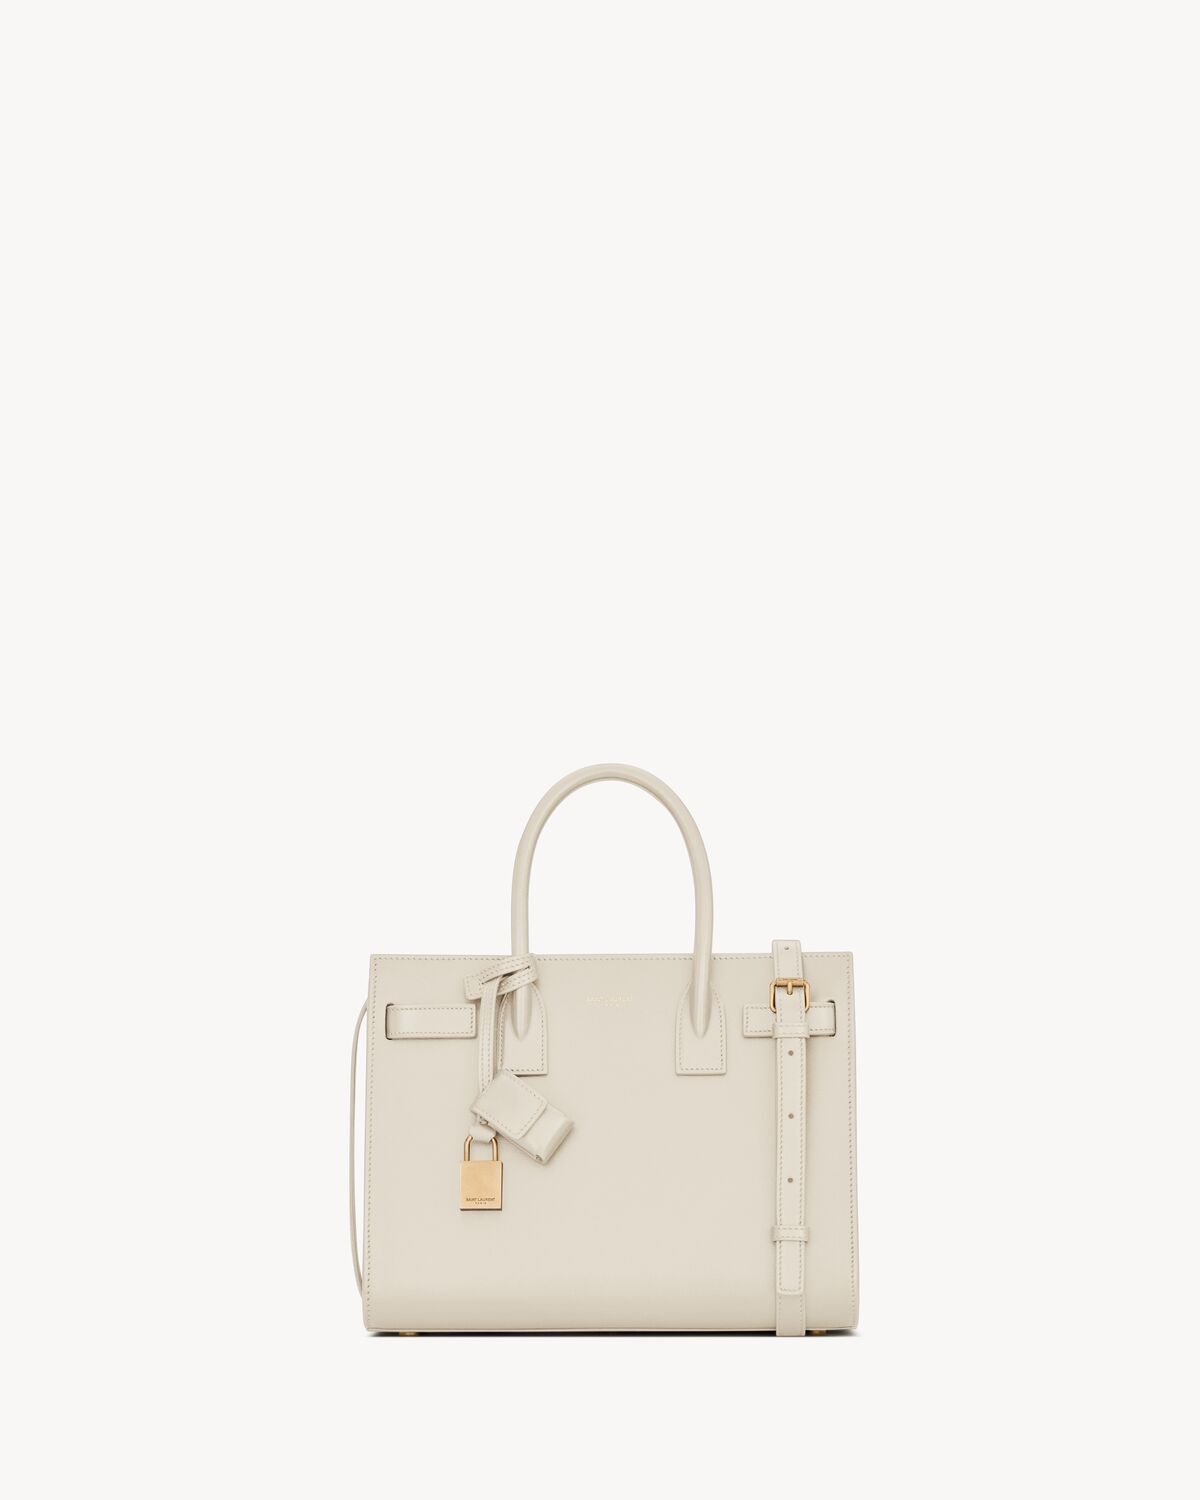 SAC DE JOUR BABY  IN SMOOTH LEATHER